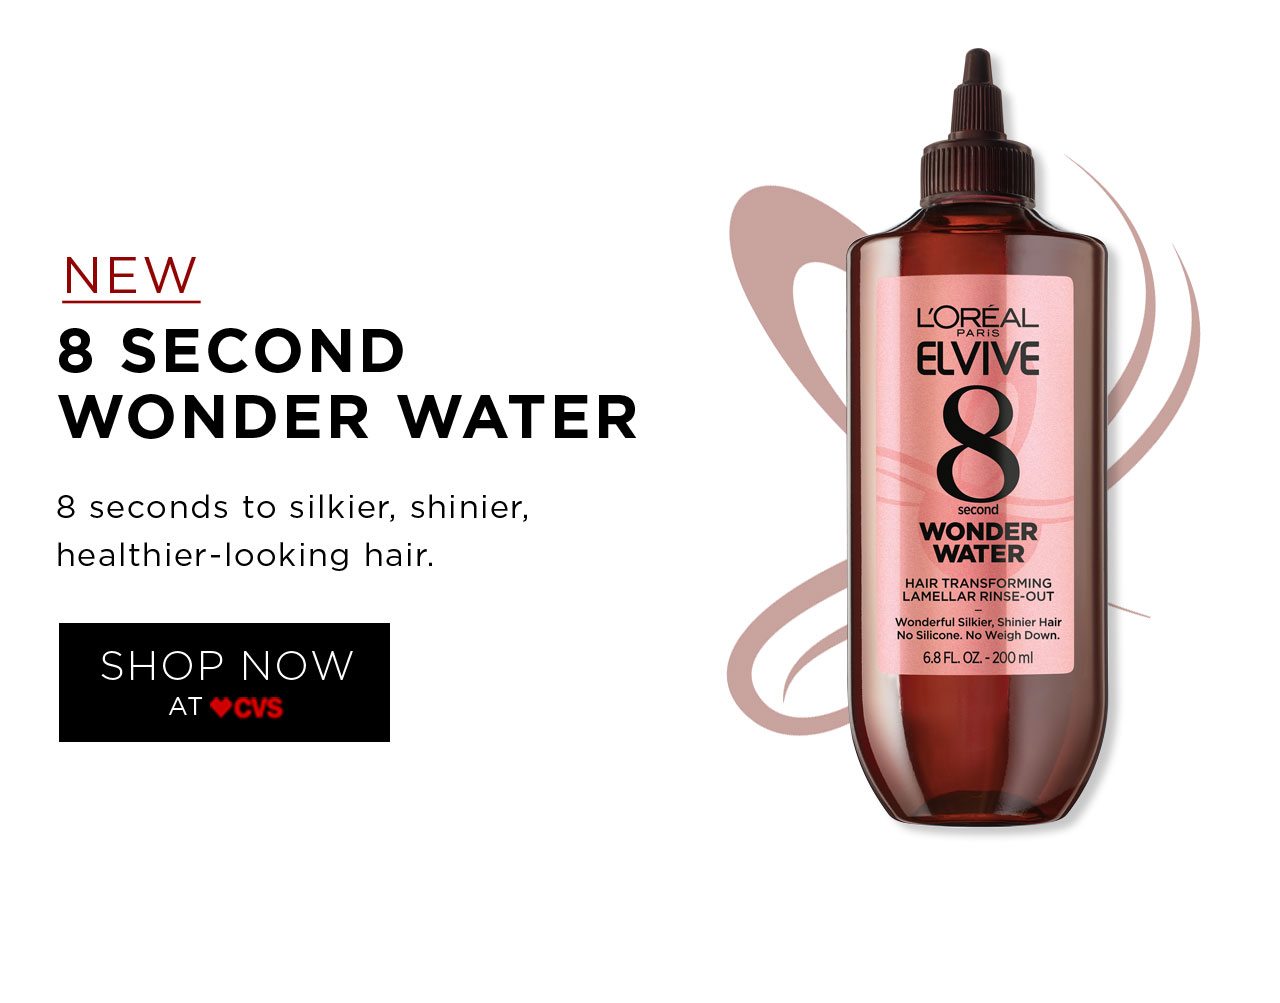 NEW - 8 SECOND WONDER WATER - 8 seconds to silkier, shinier, healthier-looking hair. - SHOP NOW AT CVS